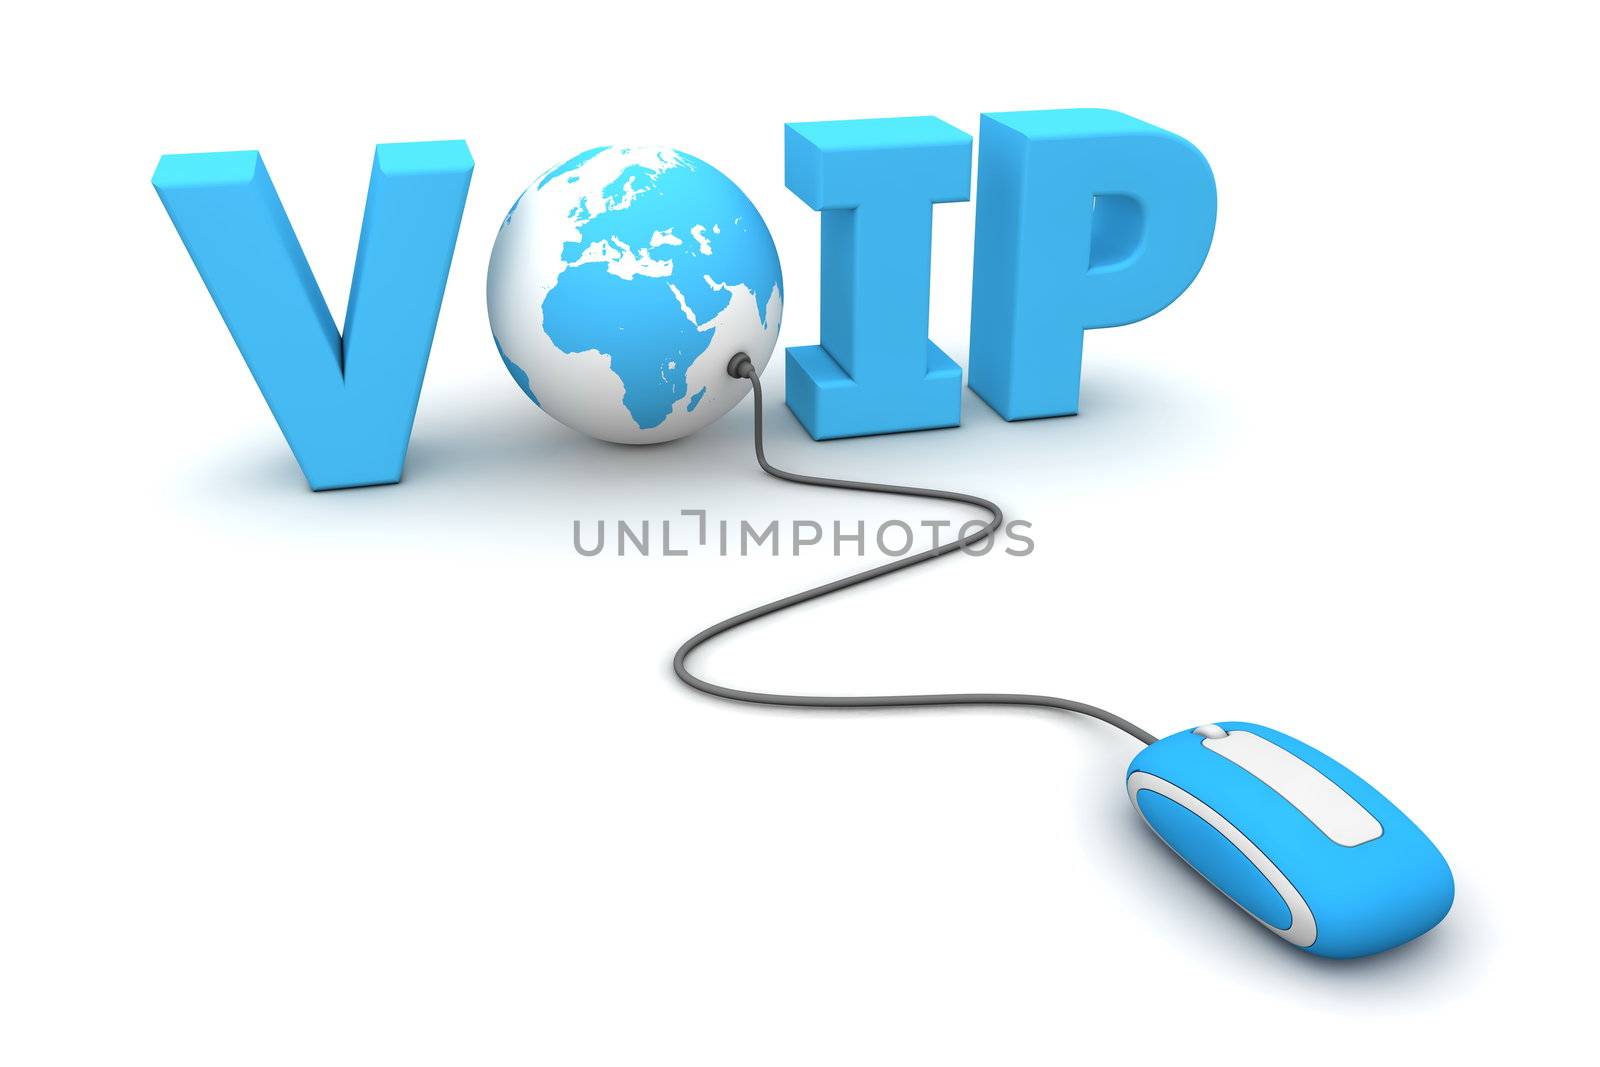 modern blue computer mouse connected to the blue word VoIP - the letter O is replaced by a globe